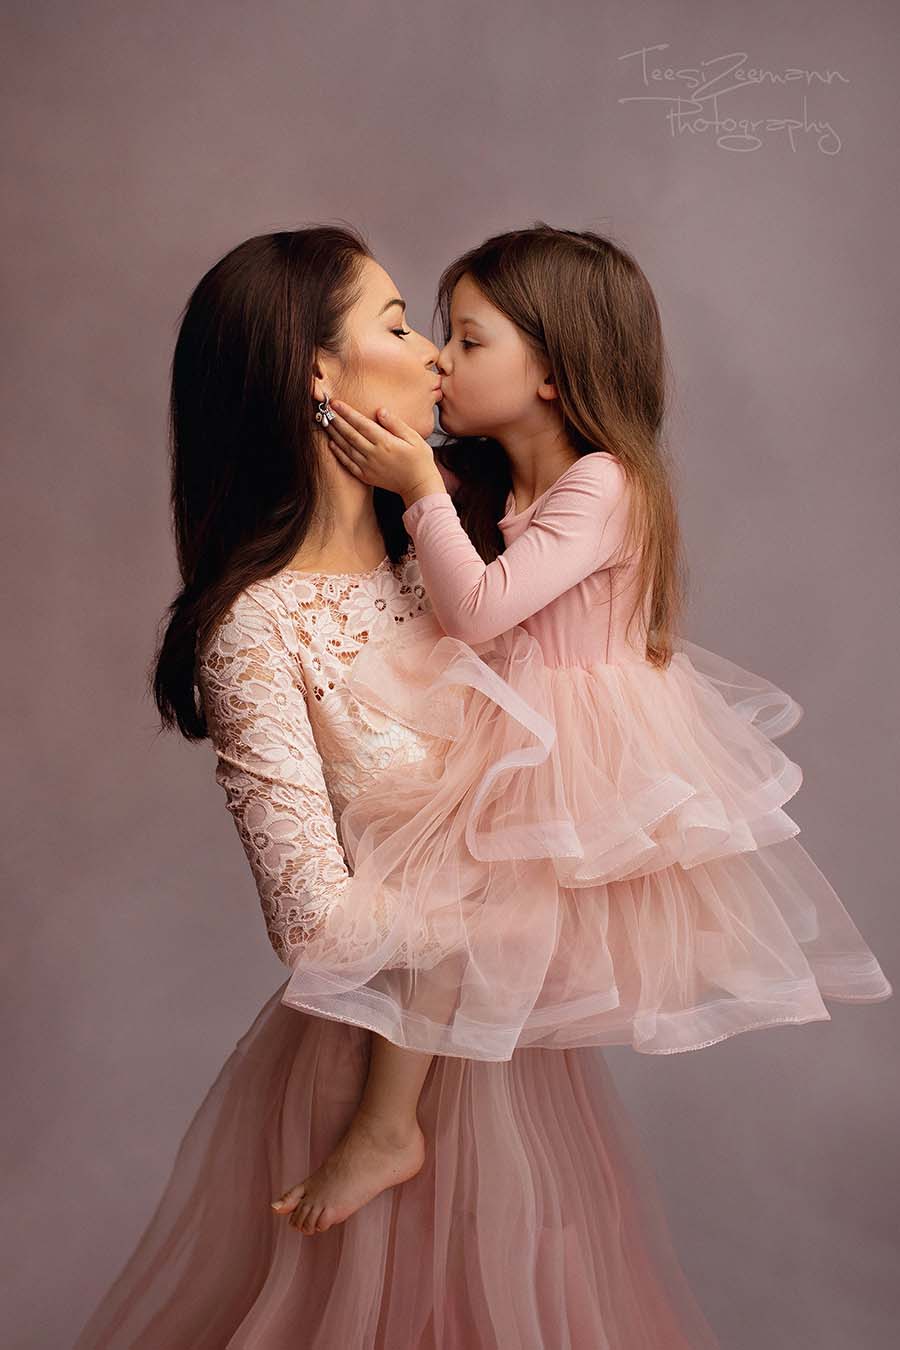 mom and daughter are giving each other a kiss during their photo shoot in a studio. they are wearing matching dresses in dusty pink color. mom has a top with long sleeves made of lace and a tulle skirt while the girl has a top made of jersey and a tulle skirt.